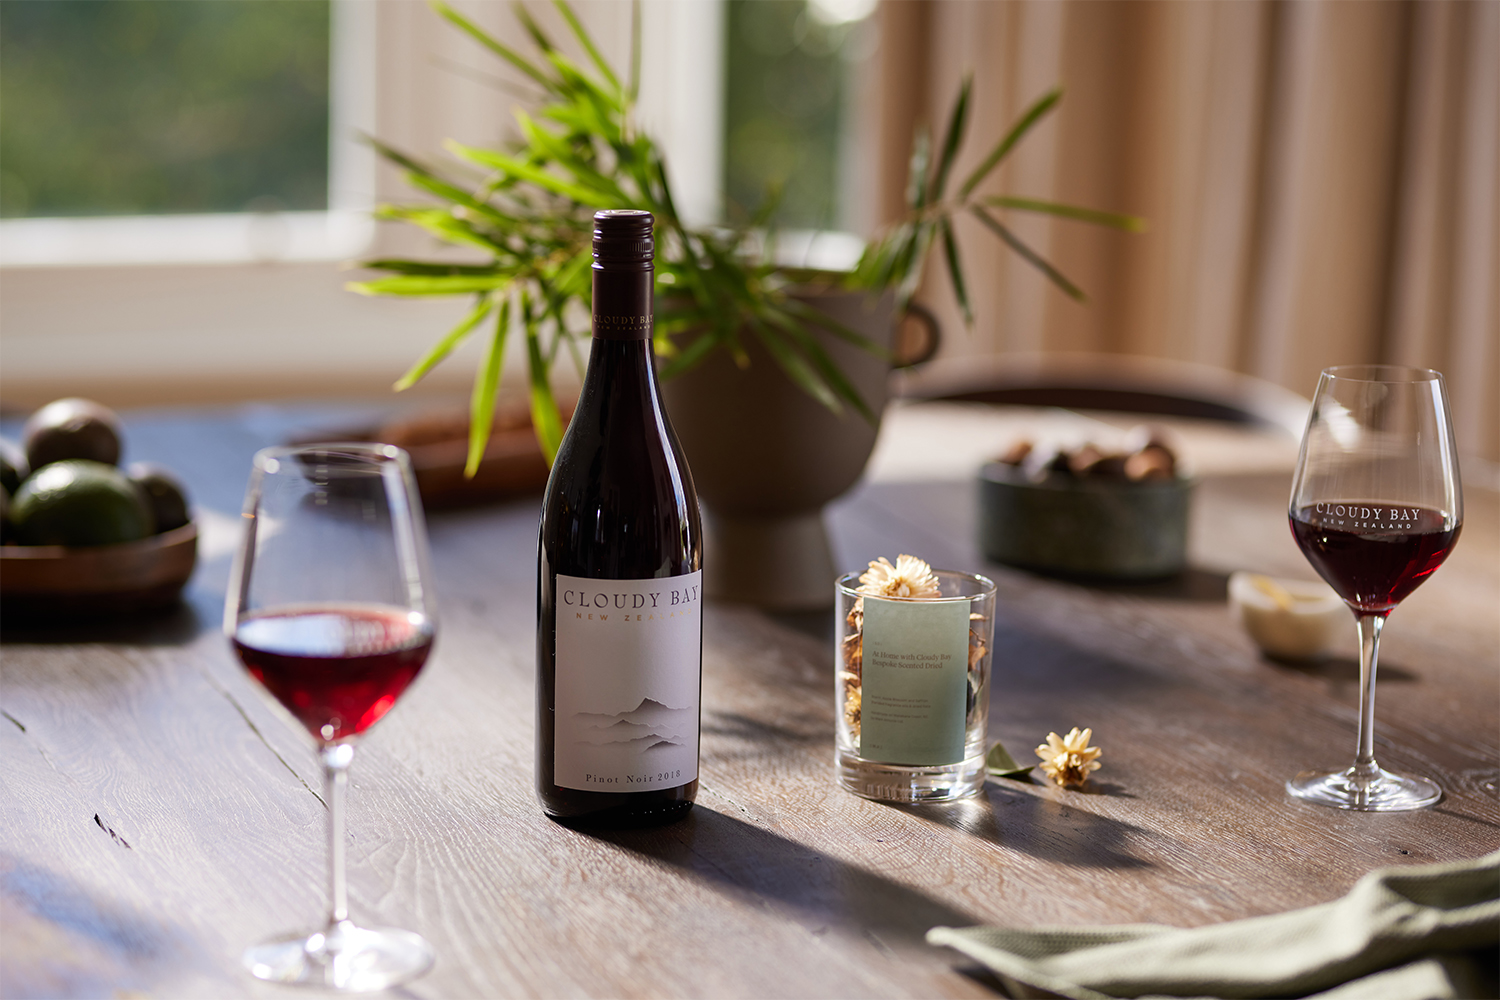 Winter's Here, So Why Not Enjoy Cloudy Bay At Home This Season? - NZ Herald